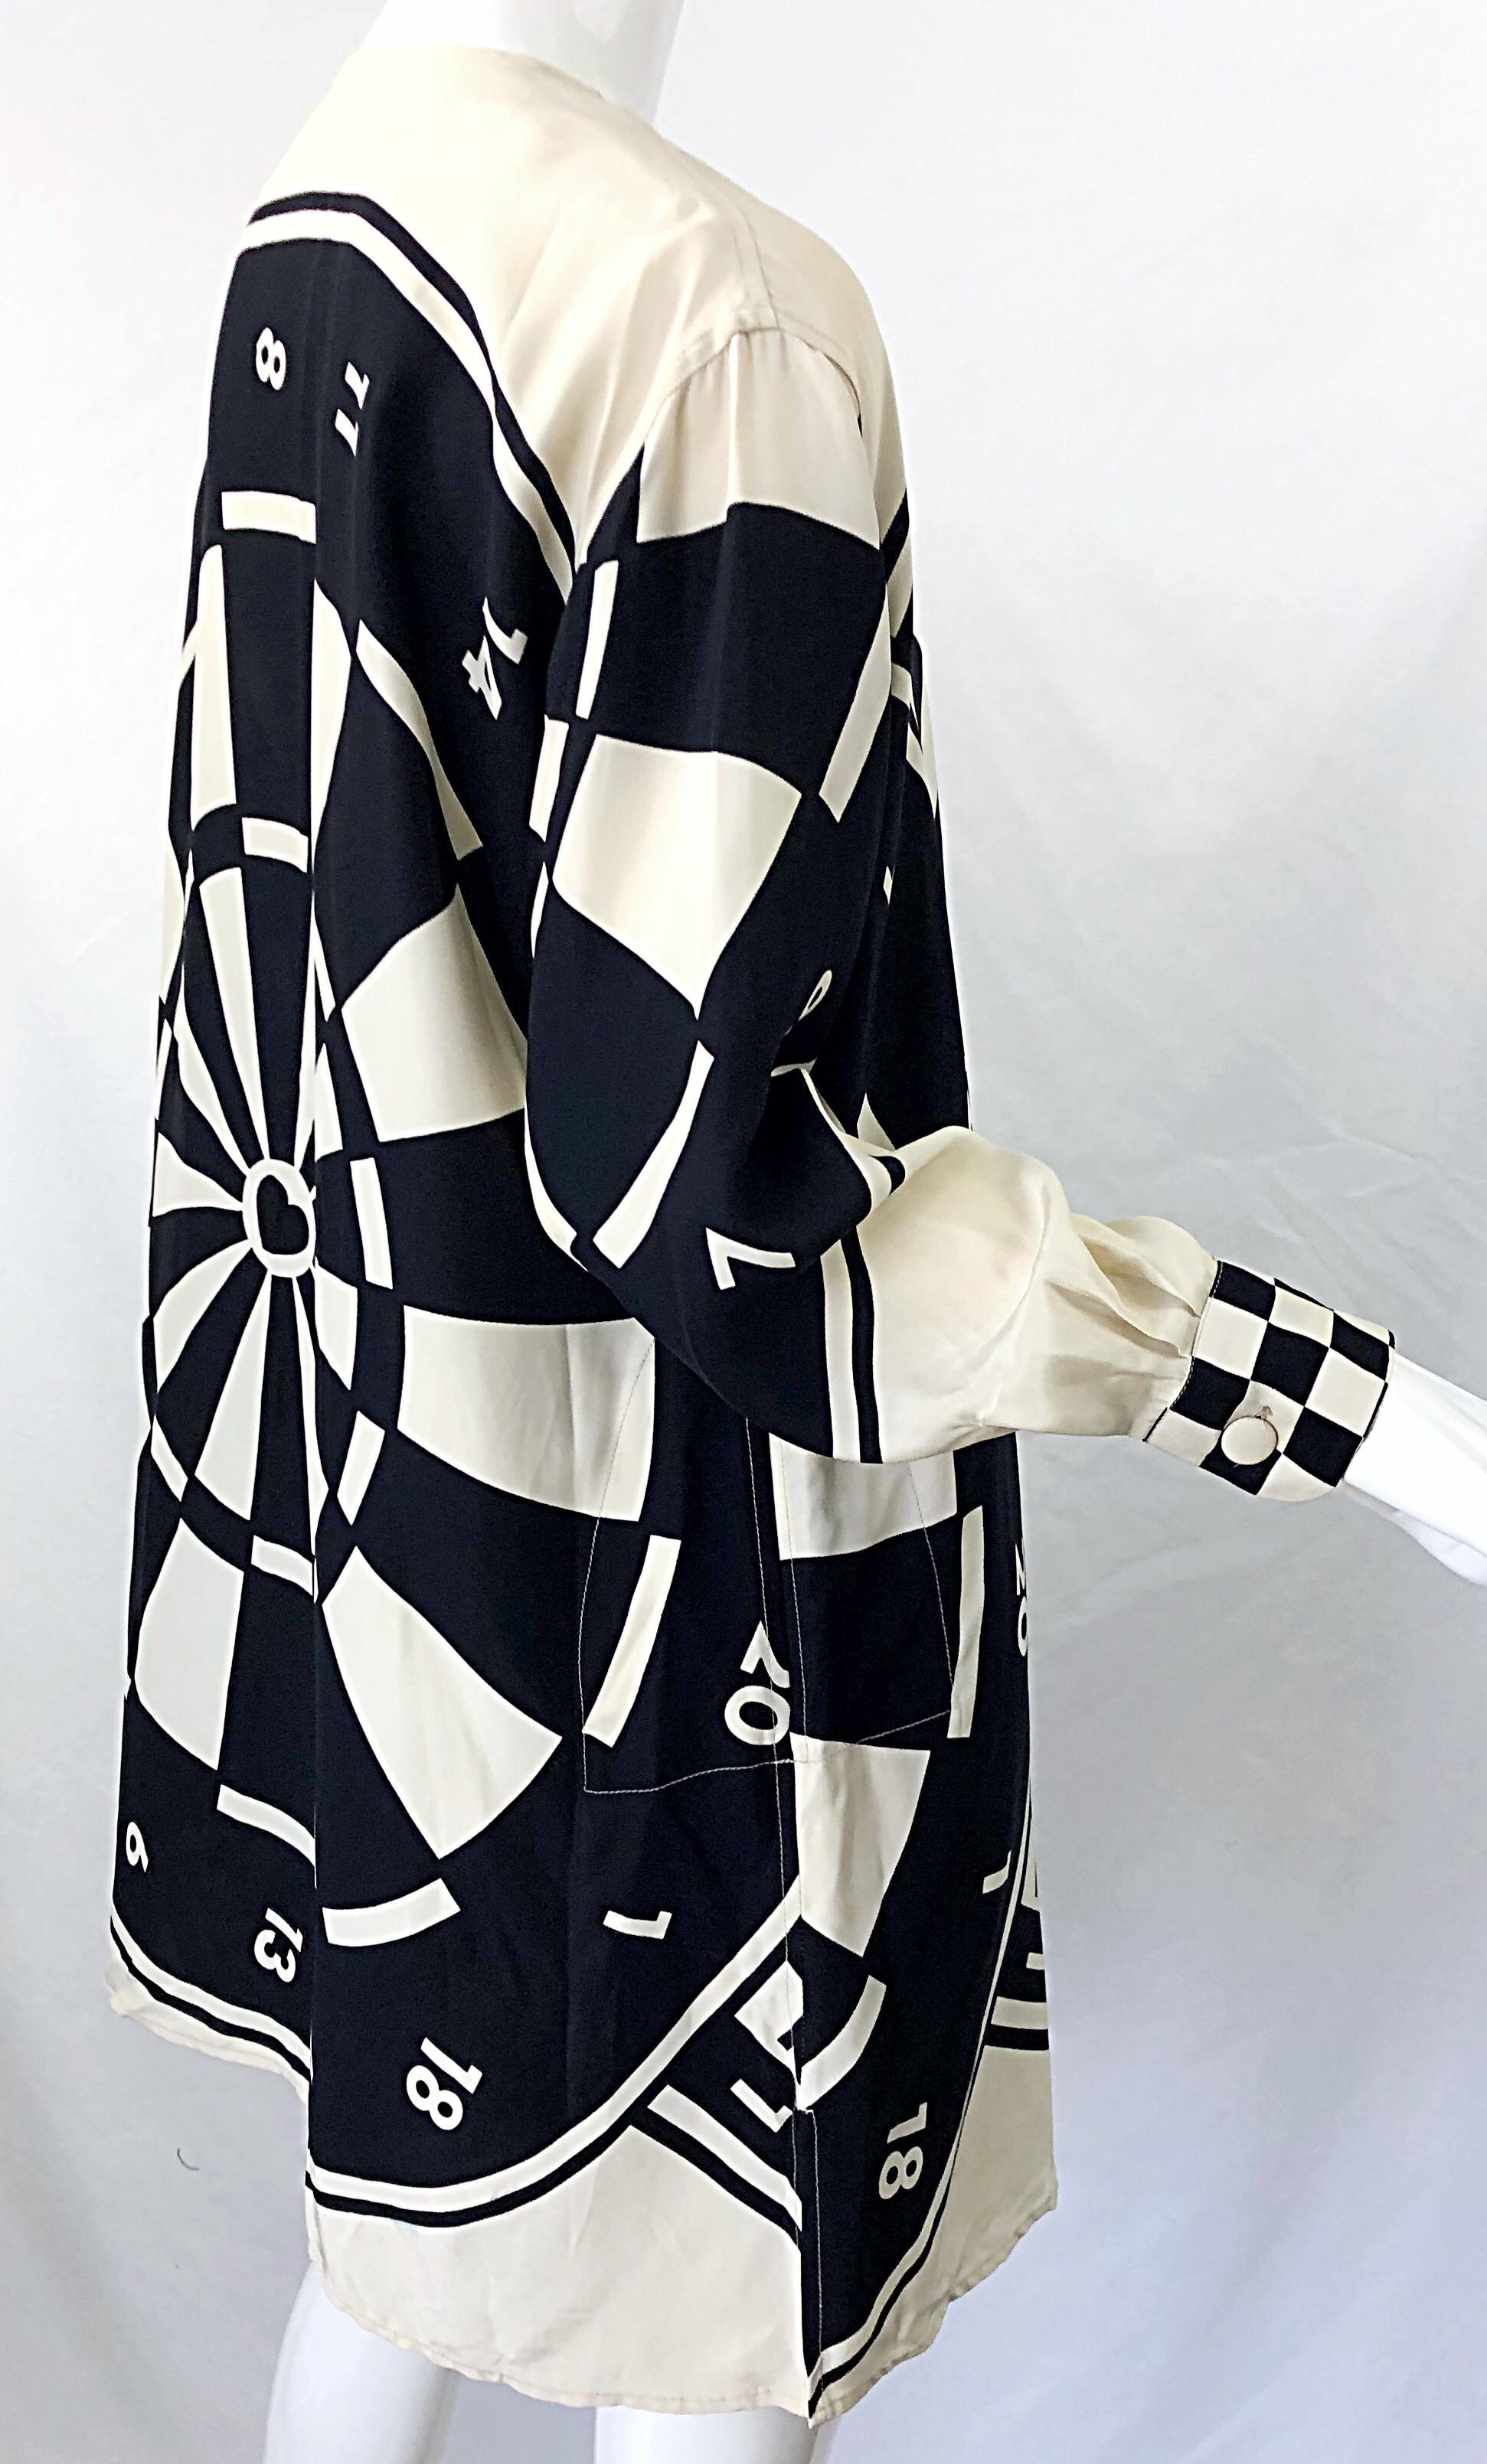 1980s Moschino Cheap & Chic Bullseye Black and White Size 8 Vintage Tunic Dress For Sale 2